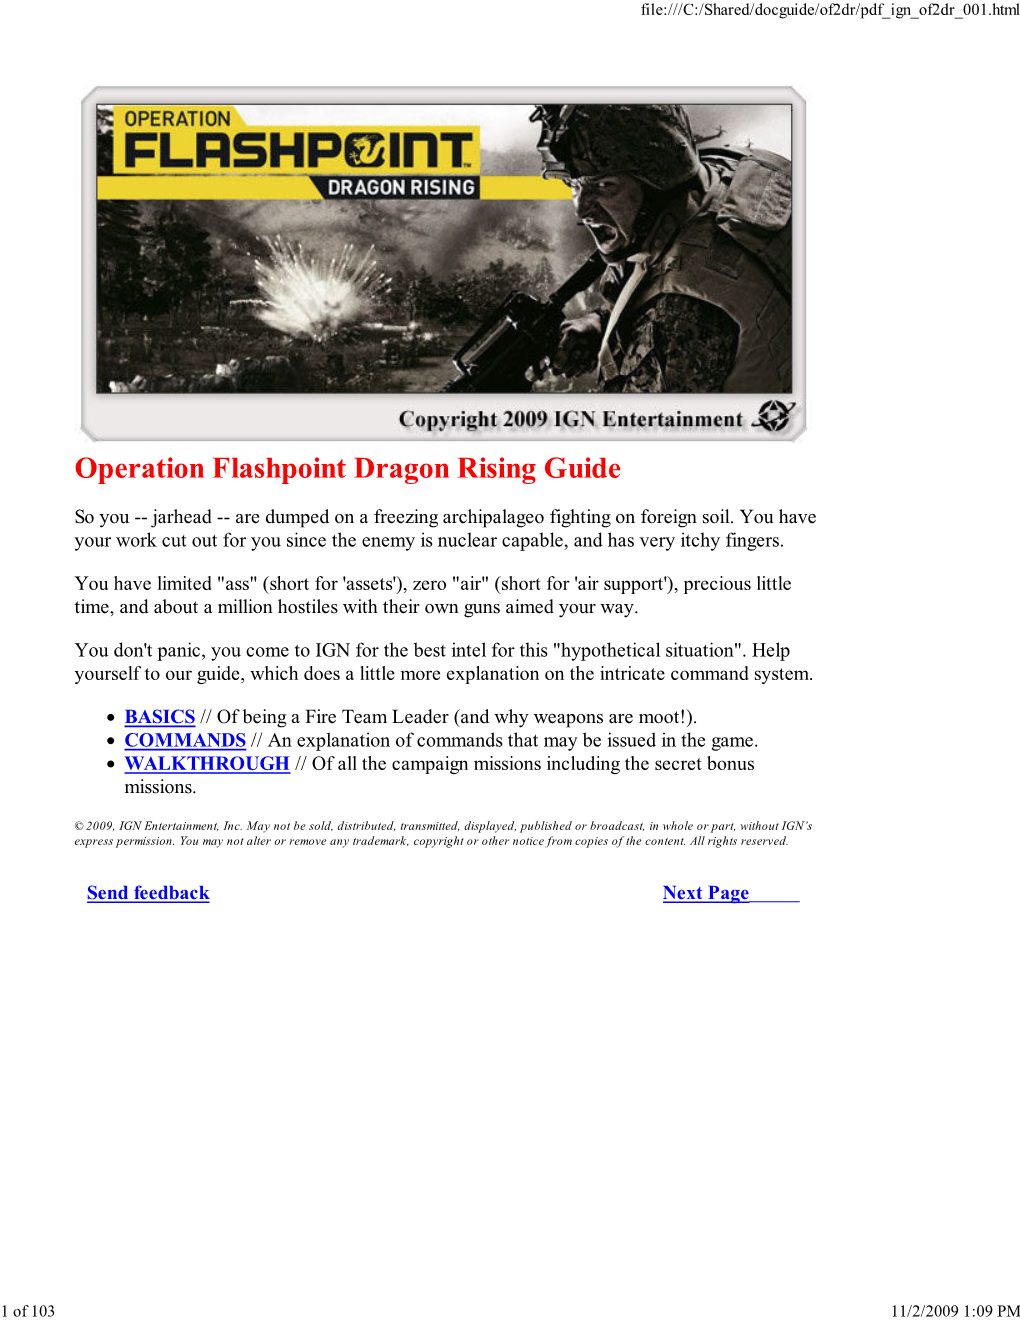 Operation Flashpoint Dragon Rising Guide